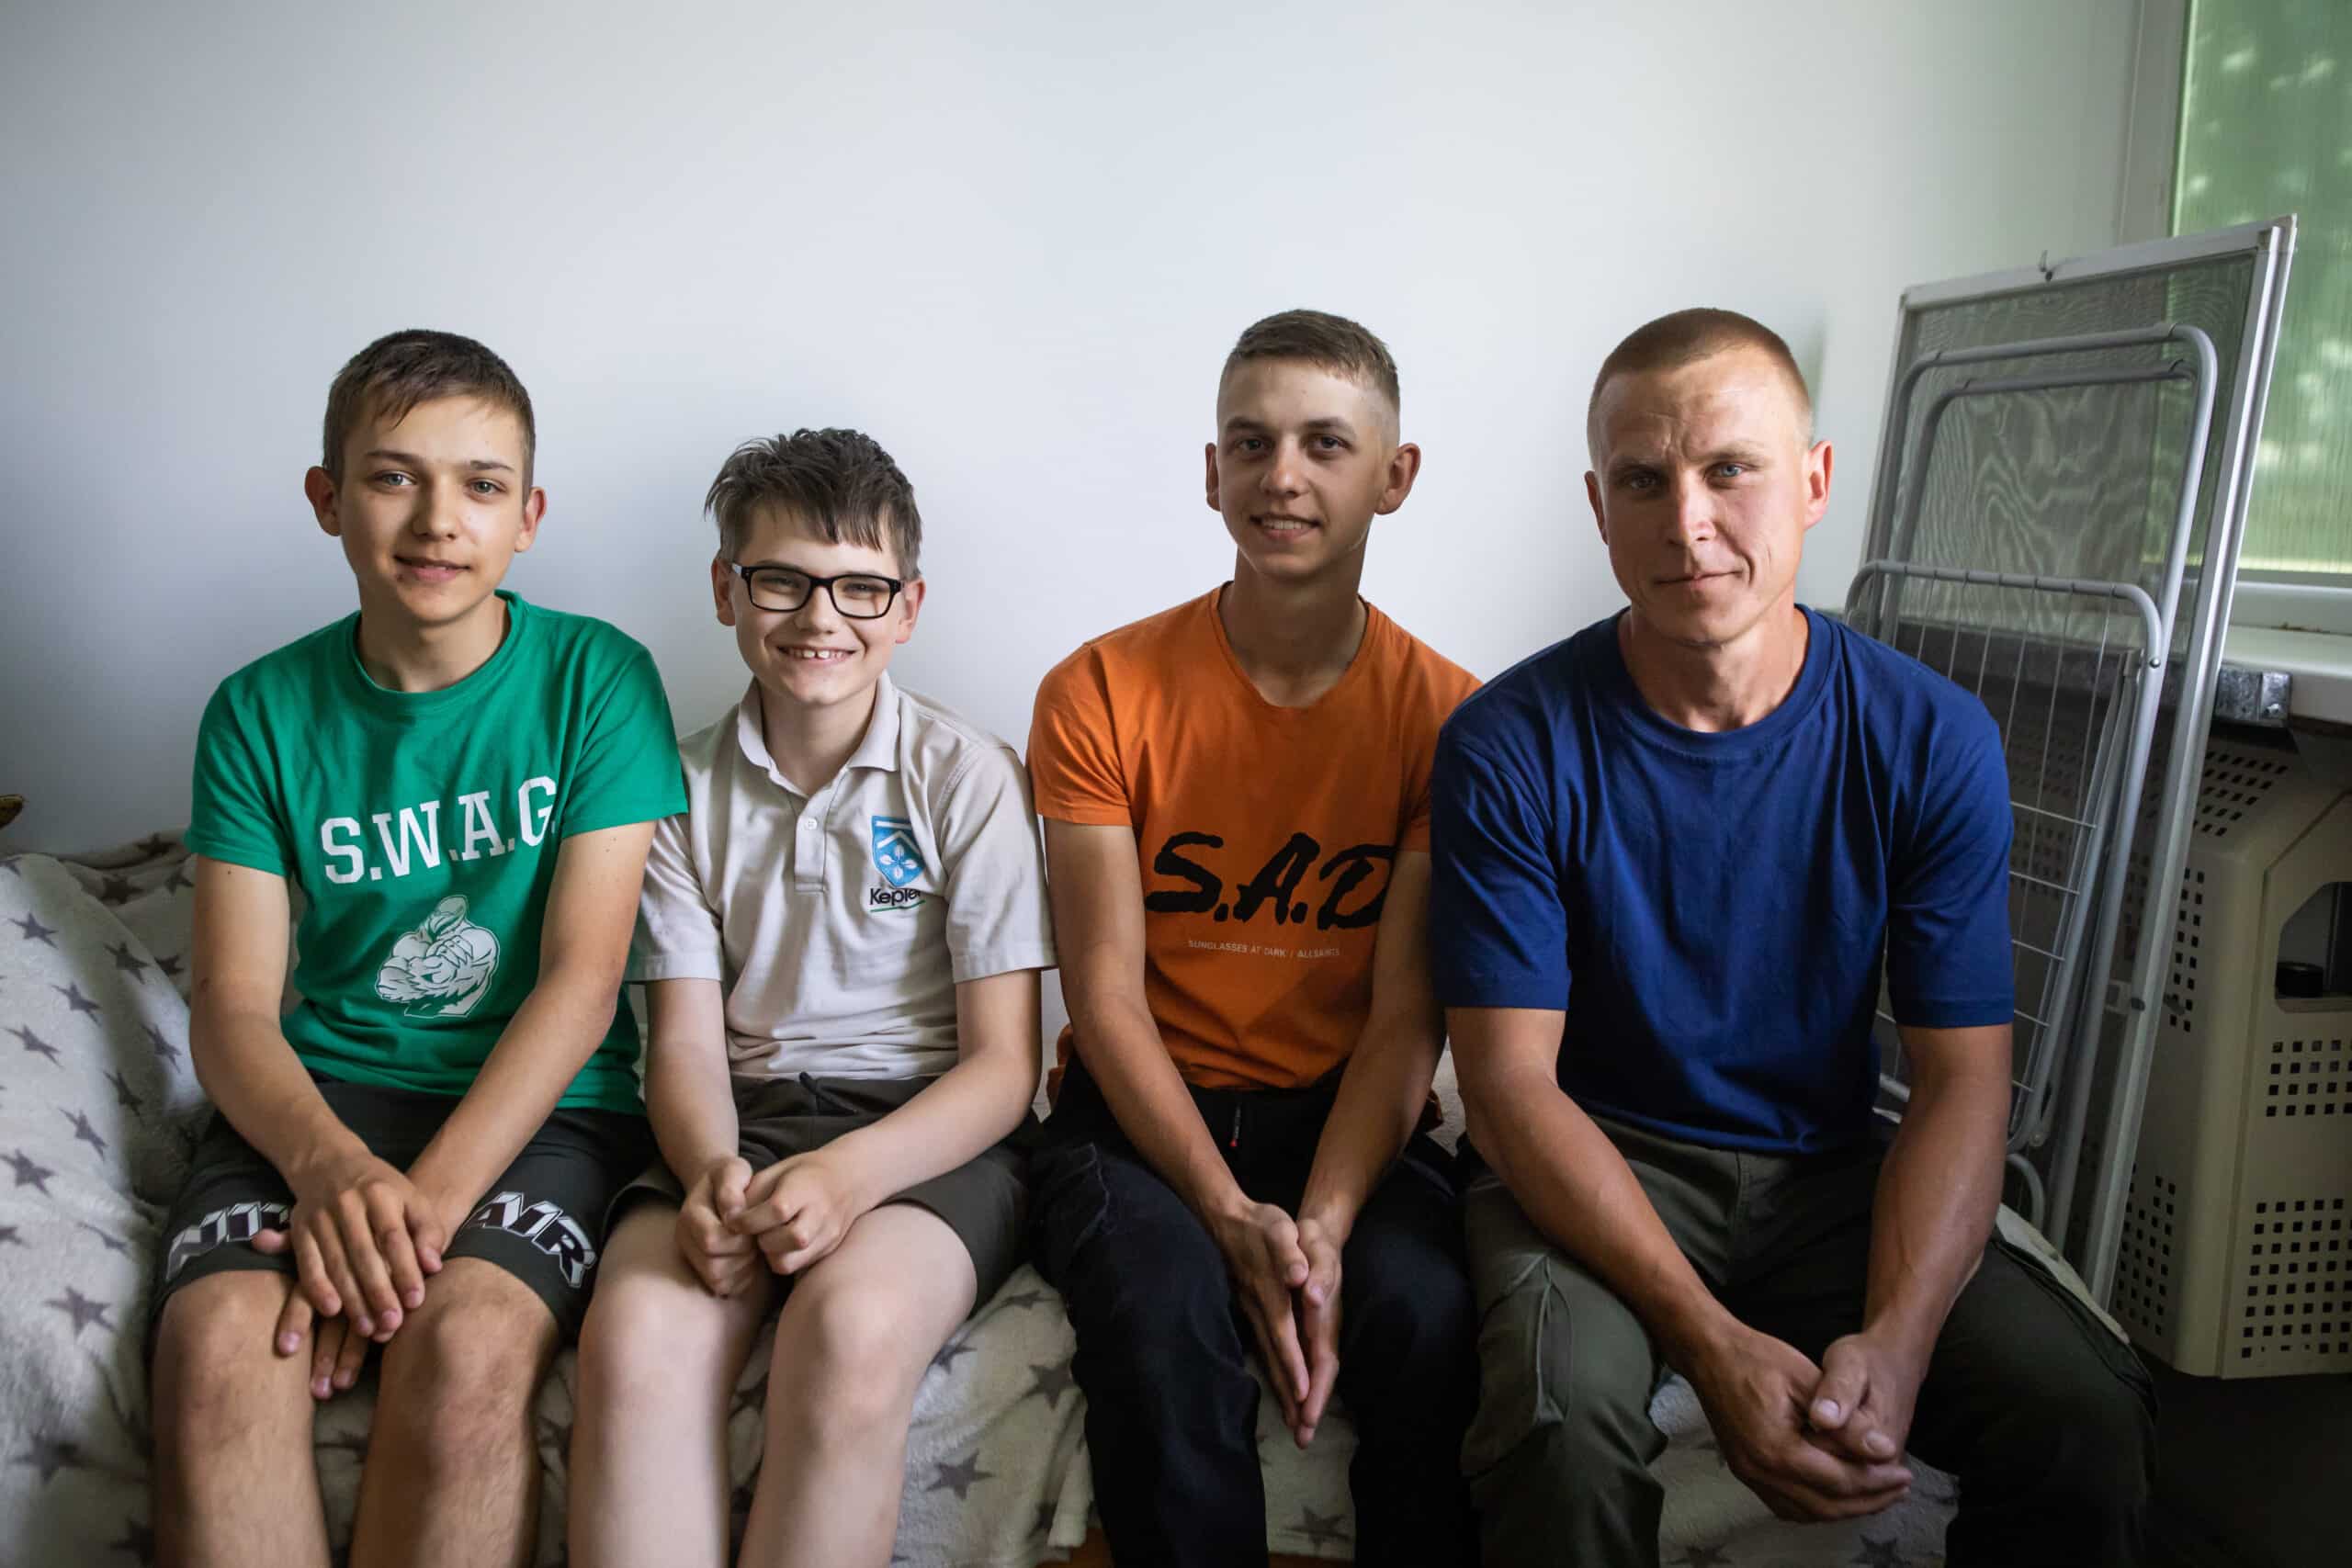 Kyrylo* adopted his nephews after their home was destroyed by Russian troops. Now, we're supporting him to keep his family together.